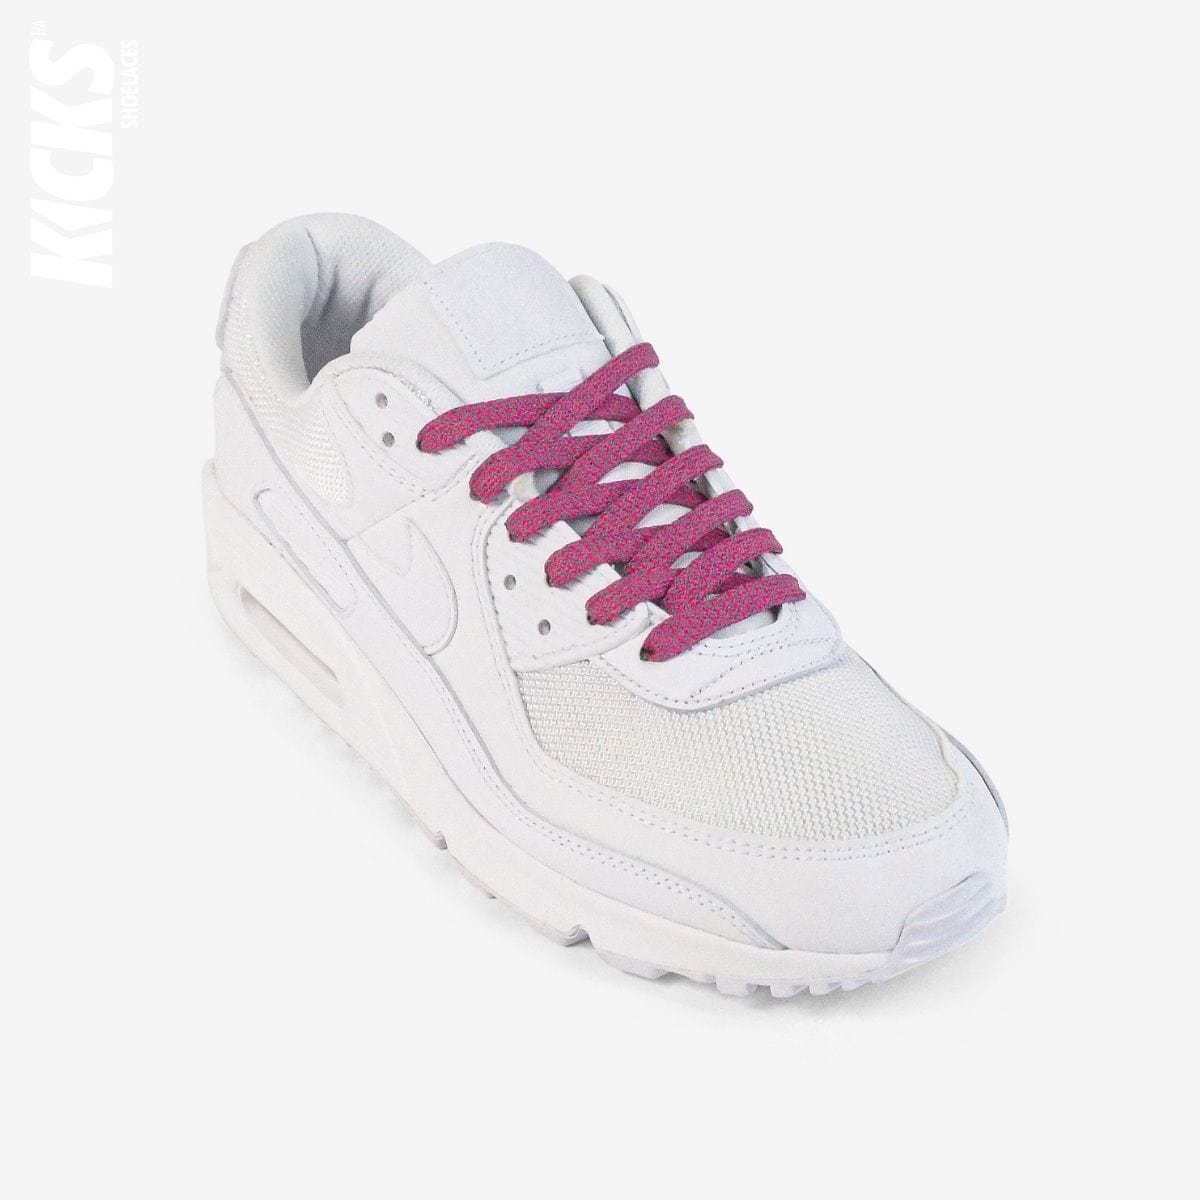 rose-pink-reflective-colored-shoelaces-on-white-sneakers